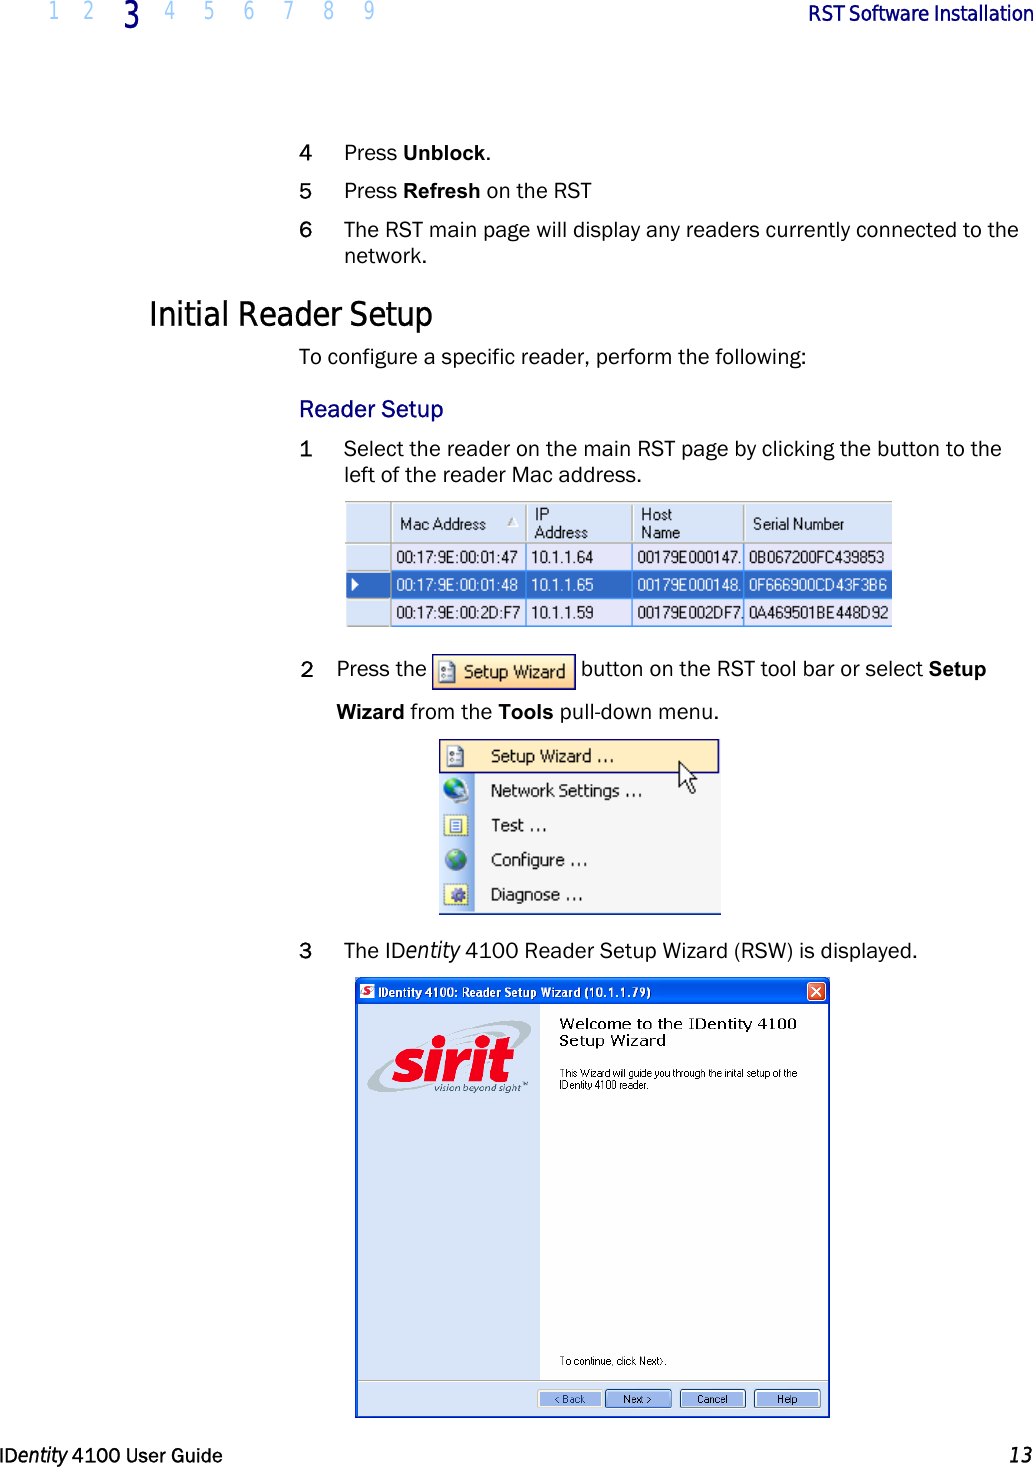  1 2 3 4 5 6 7 8 9       RST Software Installation   IDentity 4100 User Guide  13  4 Press Unblock. 5 Press Refresh on the RST 6 The RST main page will display any readers currently connected to the network. Initial Reader Setup To configure a specific reader, perform the following: Reader Setup 1 Select the reader on the main RST page by clicking the button to the left of the reader Mac address.  2 Press the  button on the RST tool bar or select Setup Wizard from the Tools pull-down menu.  3 The IDentity 4100 Reader Setup Wizard (RSW) is displayed.  